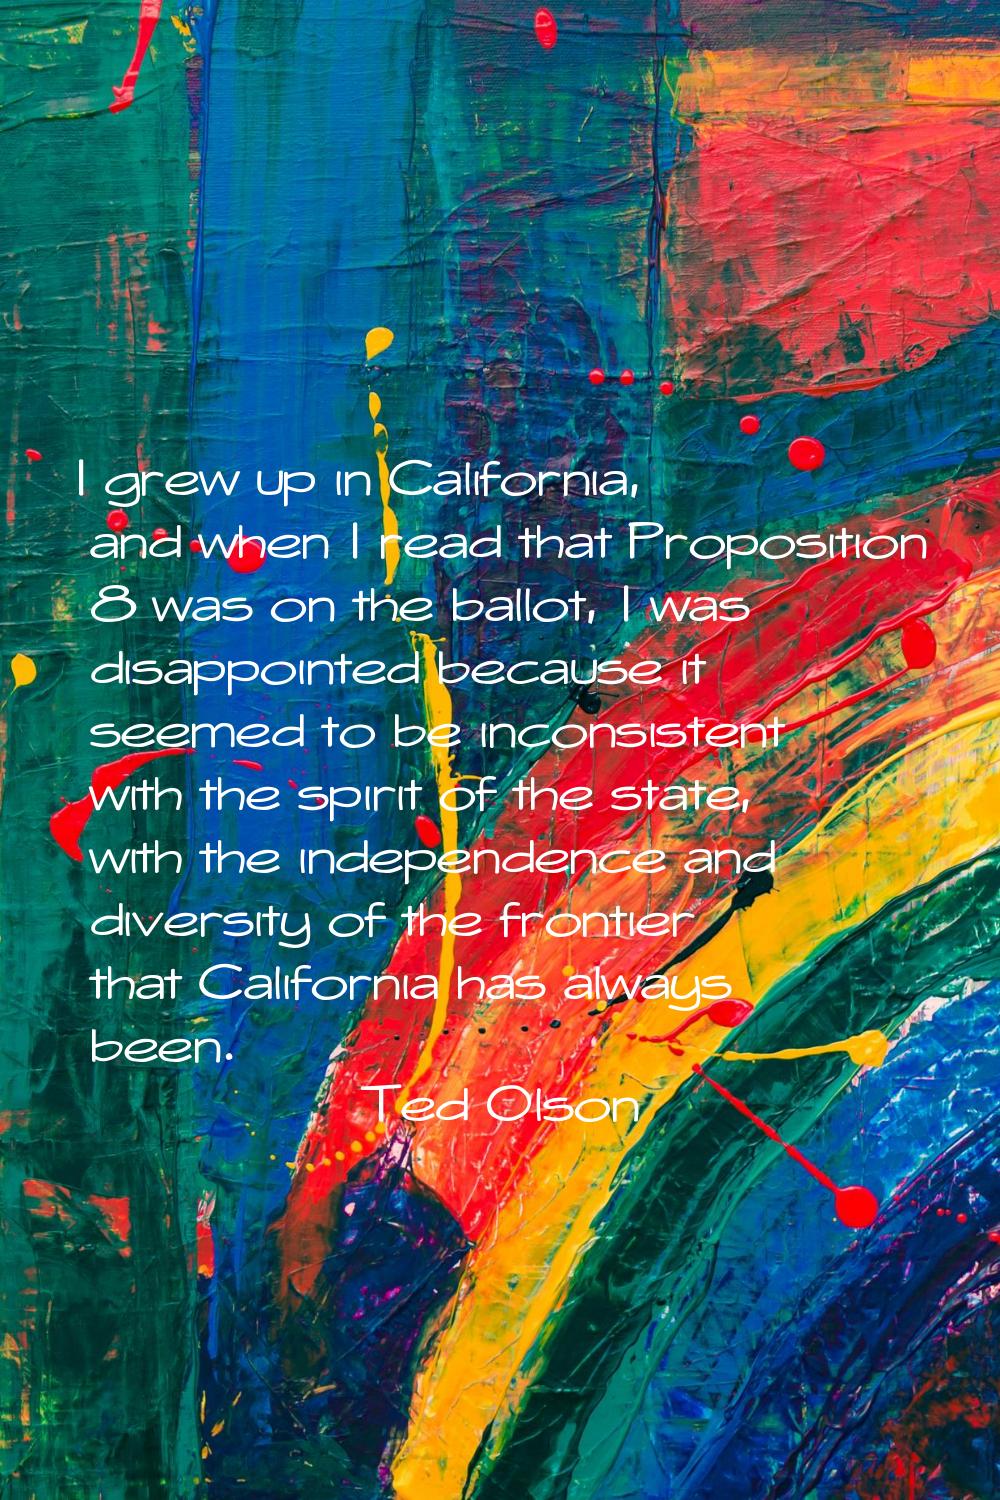 I grew up in California, and when I read that Proposition 8 was on the ballot, I was disappointed b